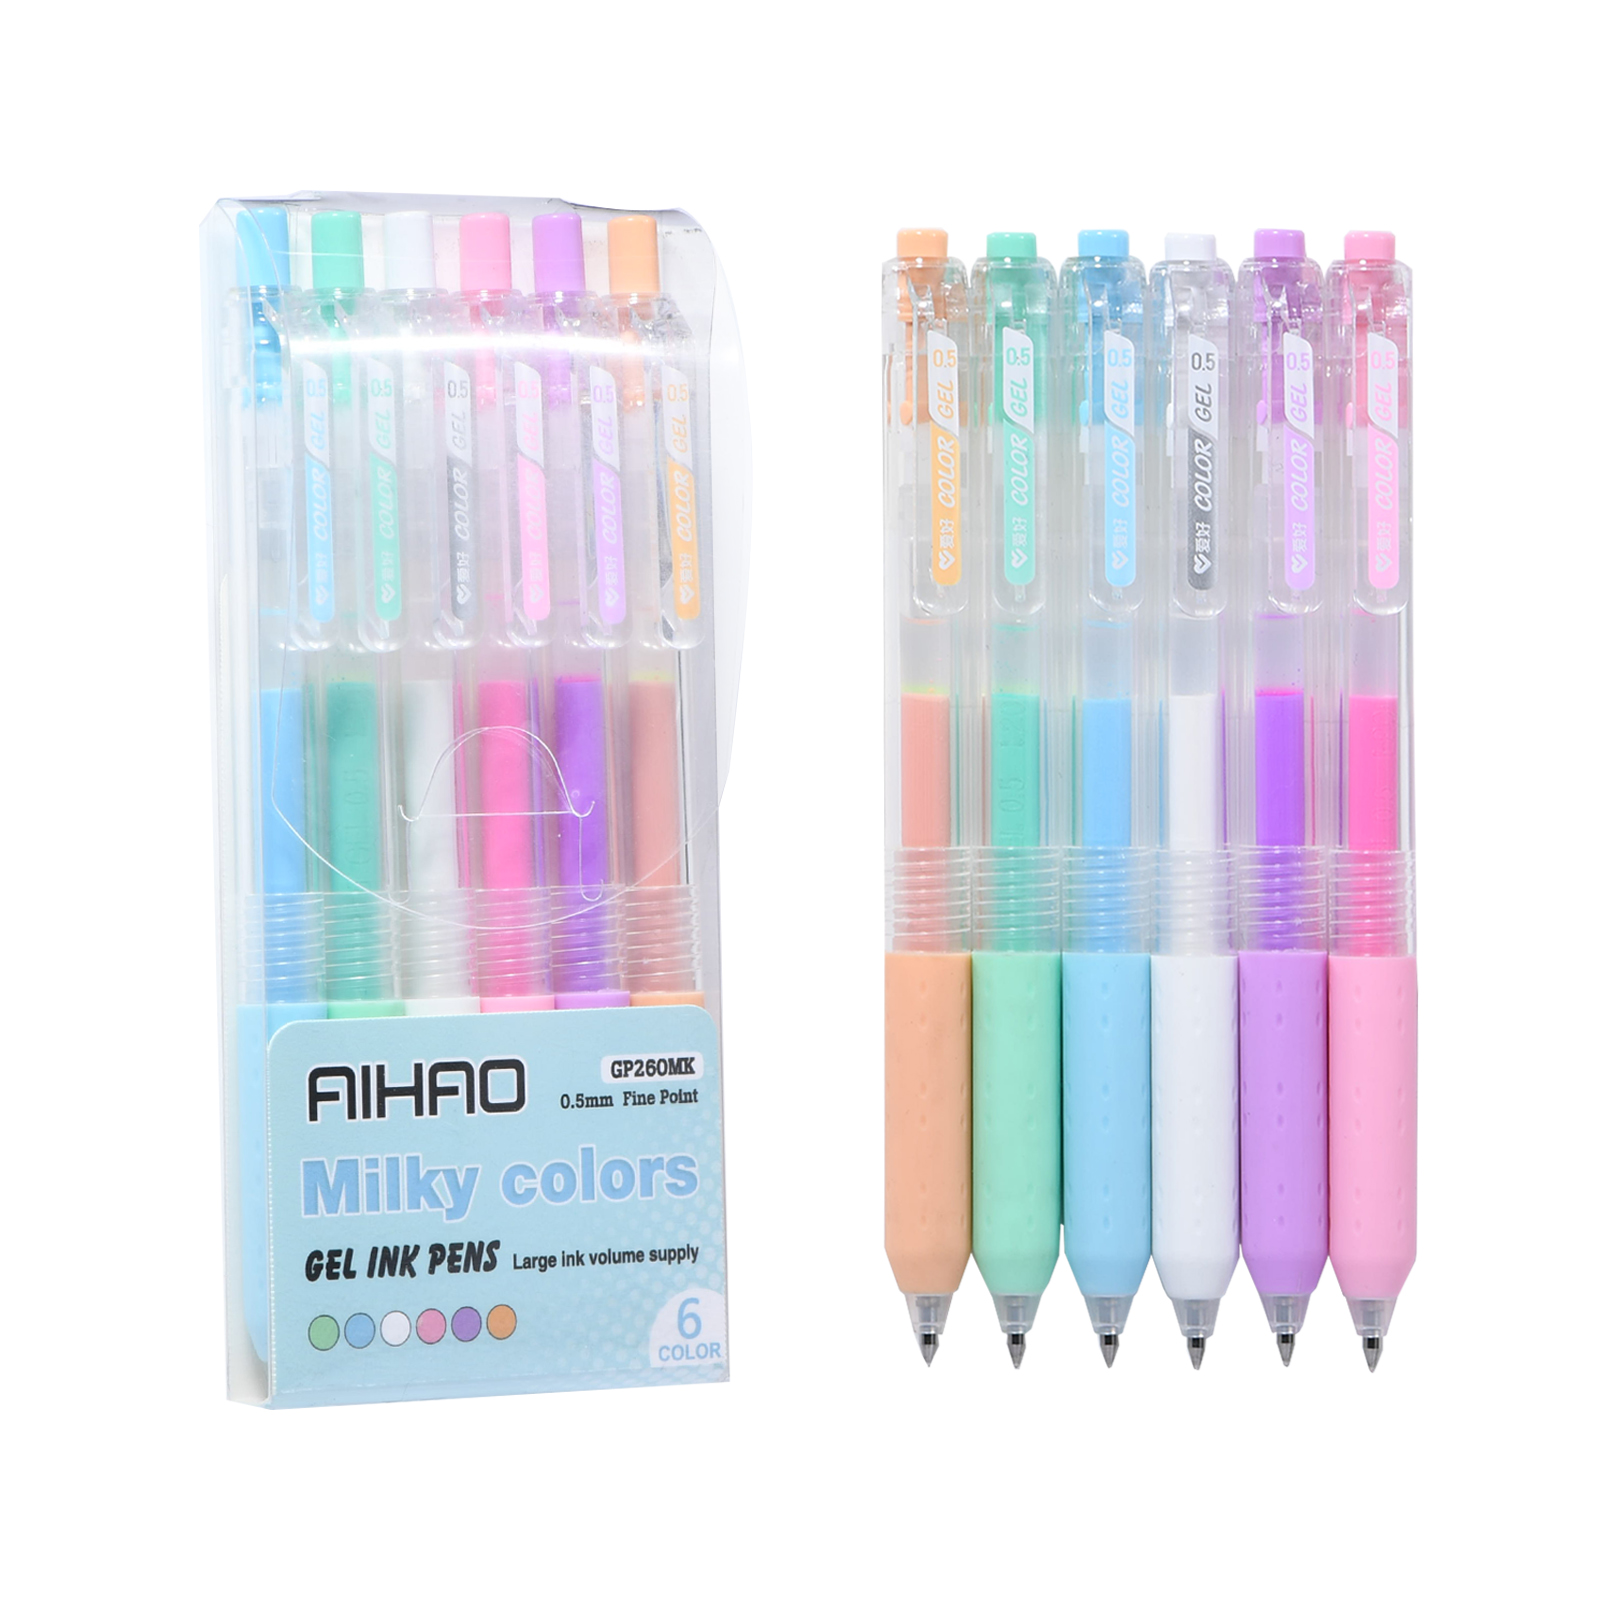 Colorful Pens Colored Pens Gel Ink Pen Ballpoint Pen for Bullet Journaling  Note Taking Writing Drawing Coloring, Japanese Stationery Fine Point Pens 